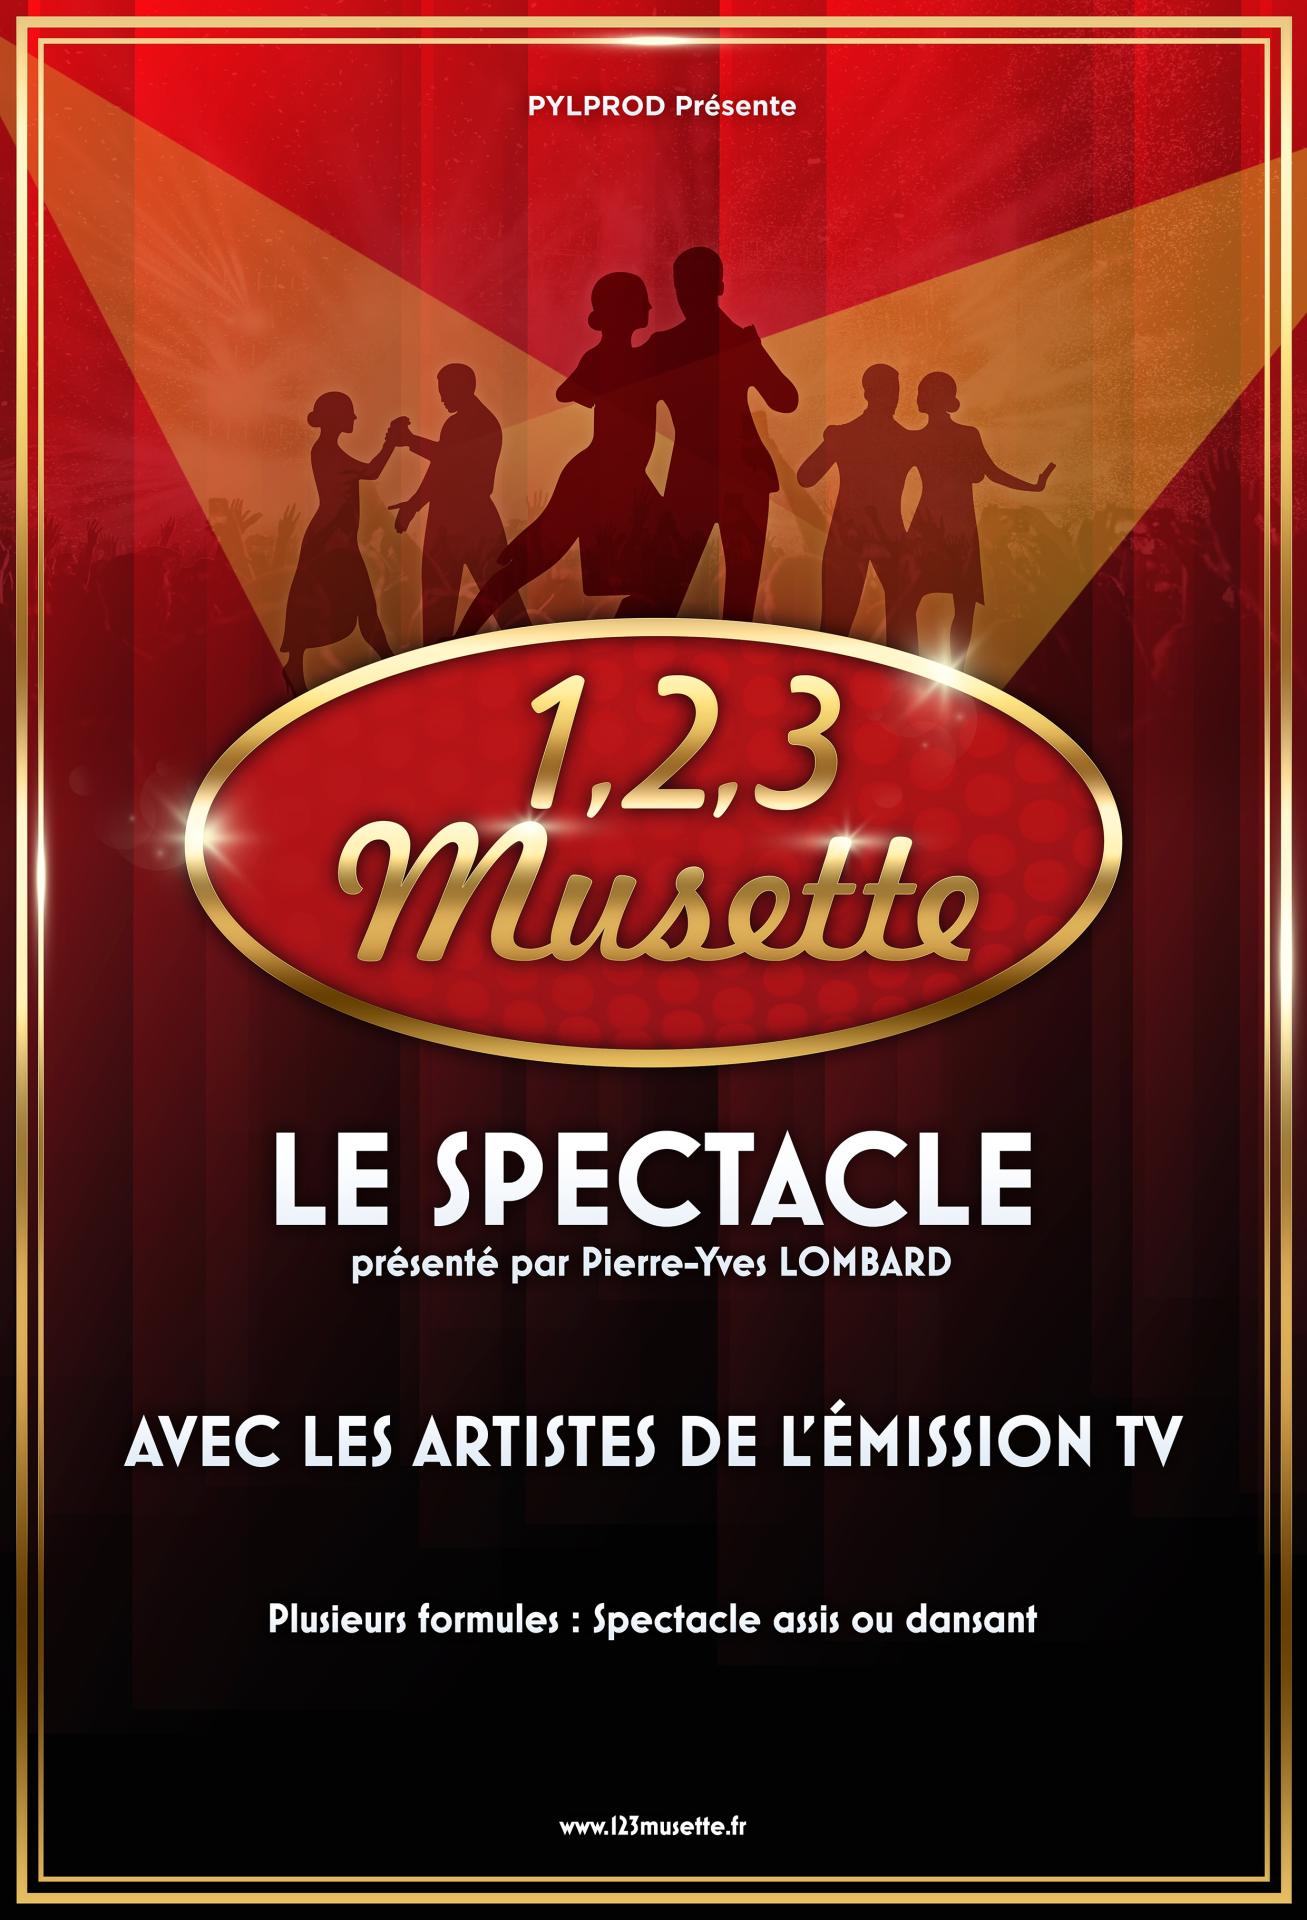 Spectacle 1 2 3 musette